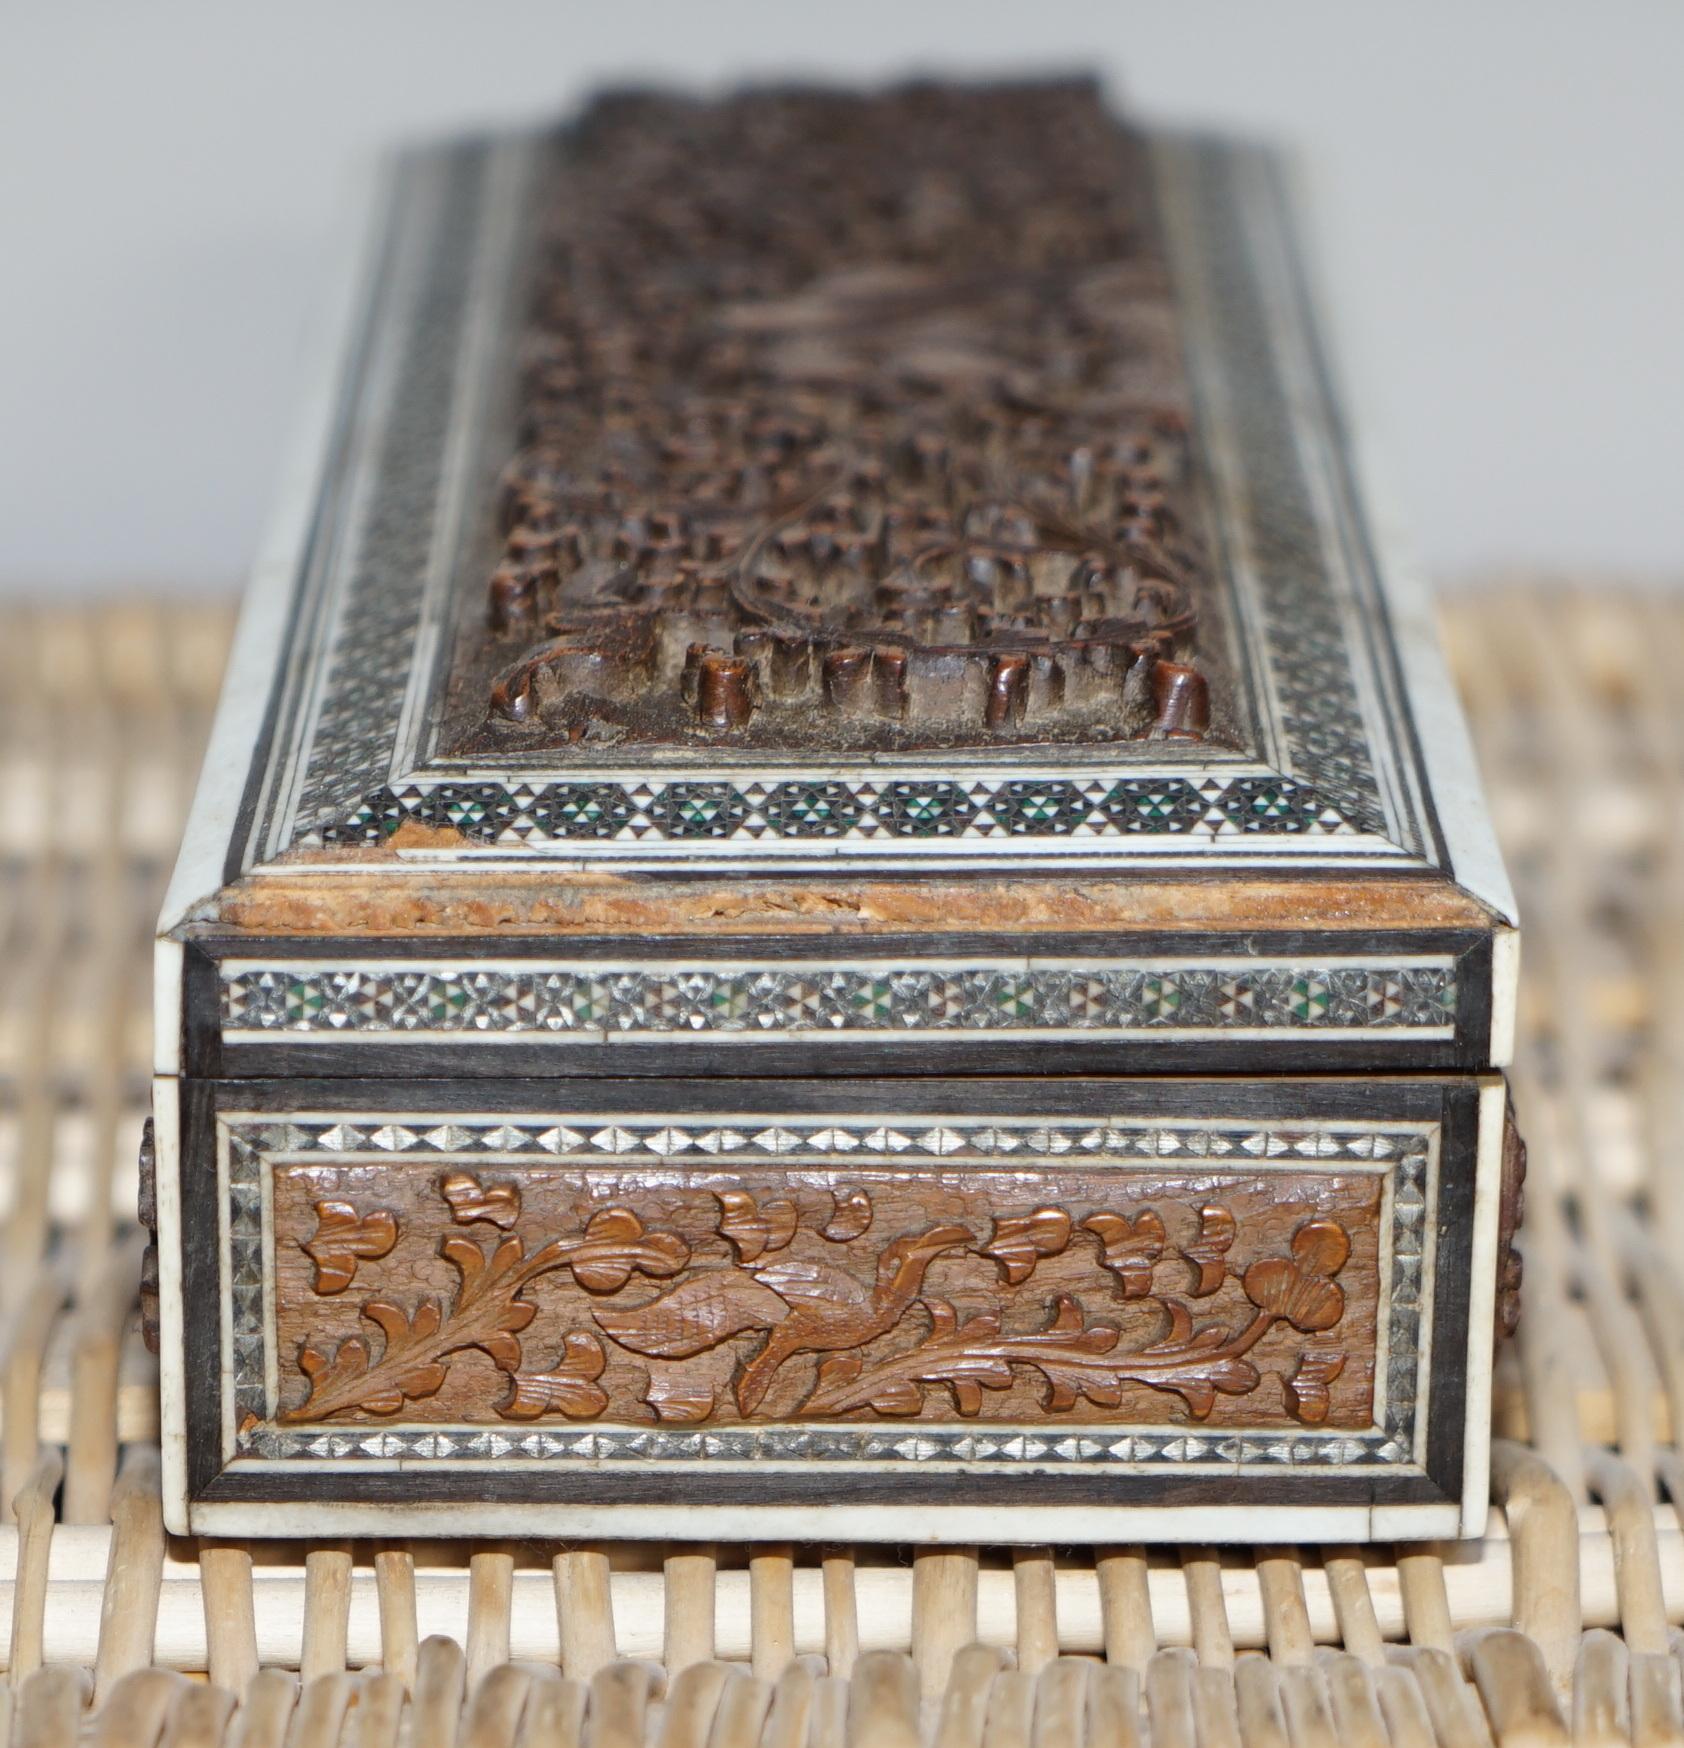 19th Century Anglo Indian Vizagapatam Carved Sandalwood Box Micro Mosaic Inlays For Sale 3